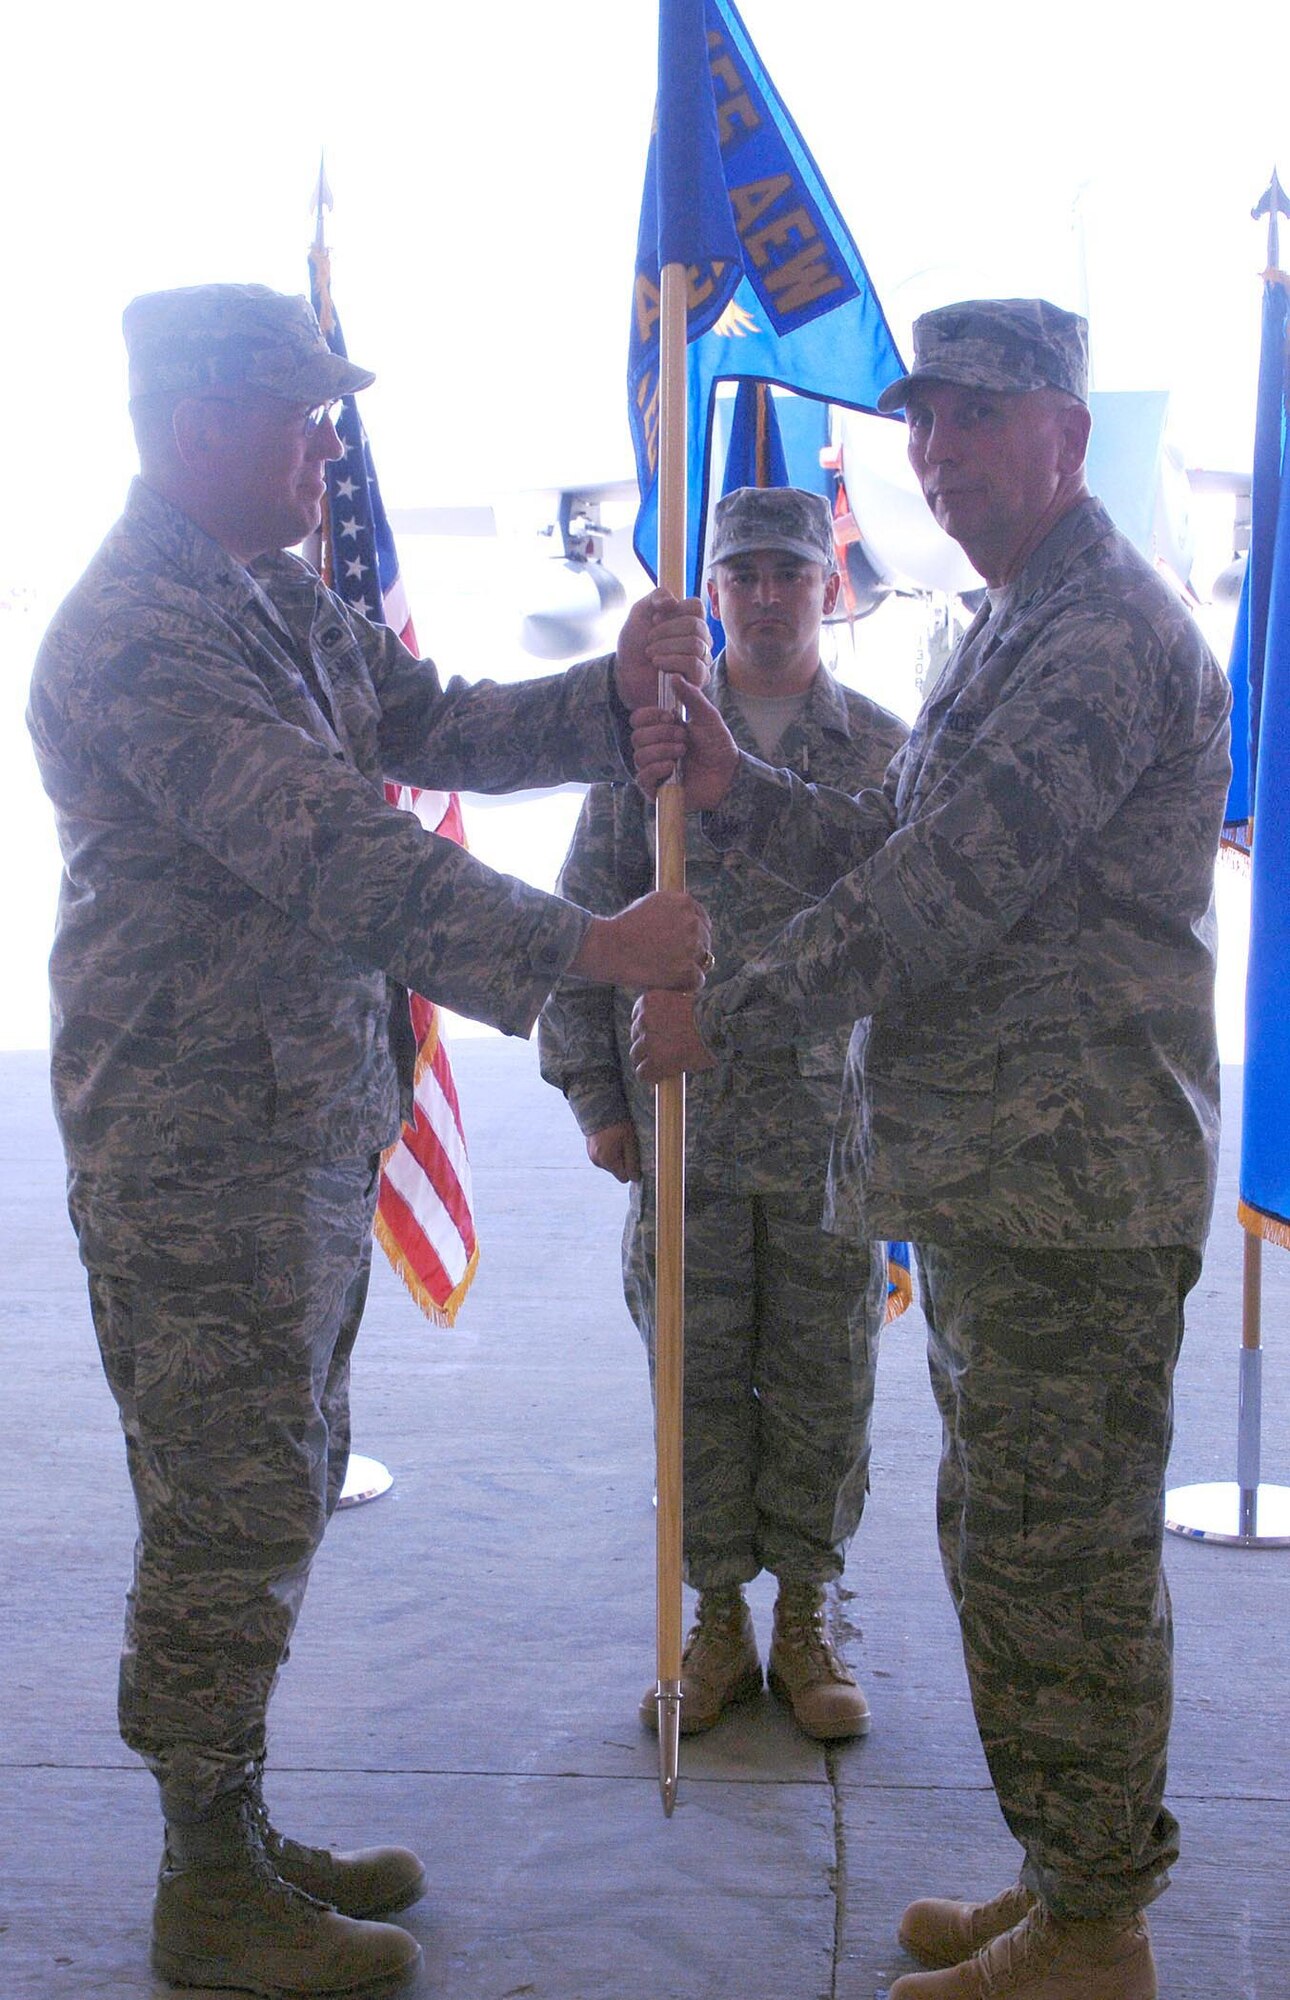 Col. Fred Fairhurst (right) accepts the 755th Air Expeditionary Group guidon from Brig. Gen. Bill Hyatt, 455th Air Expeditionary Wing commander, signifying the change of command during a ceremony July 1 at Bagram Airfield, Afghanistan. (U.S. Air Force photo by Staff Sgt. Craig Seals)